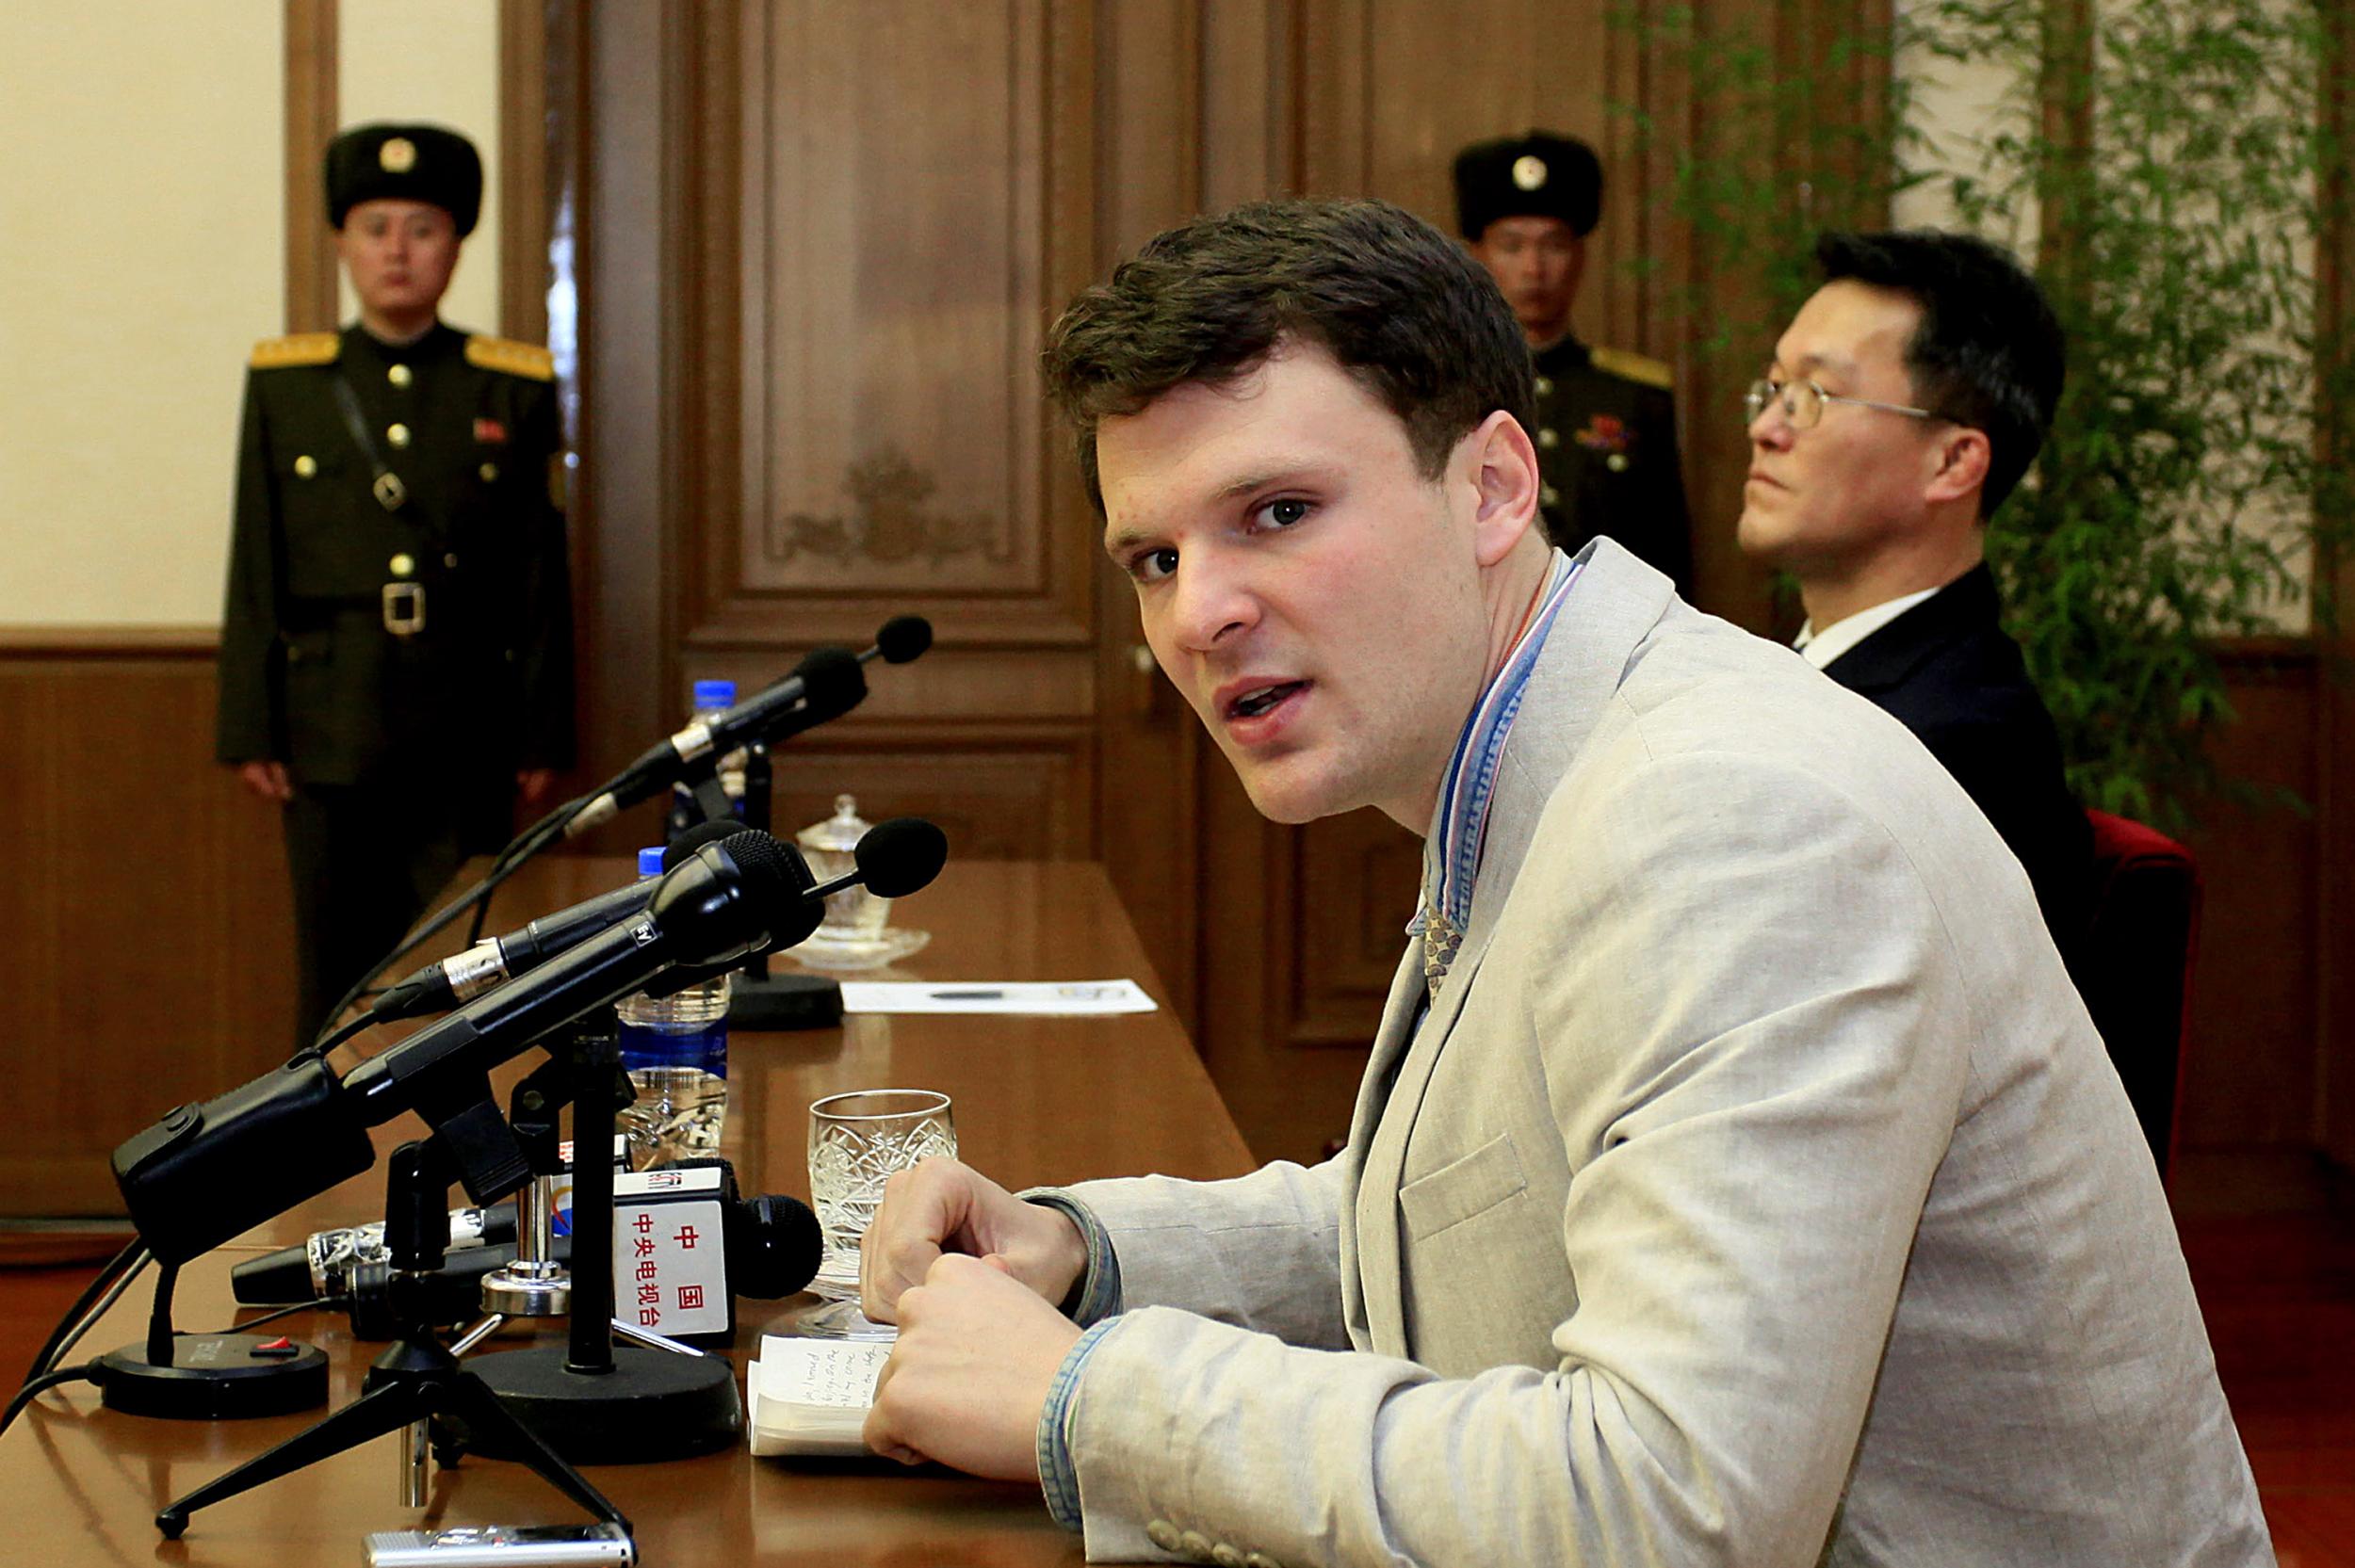 Otto Warmbier died days after being returned from North Korea